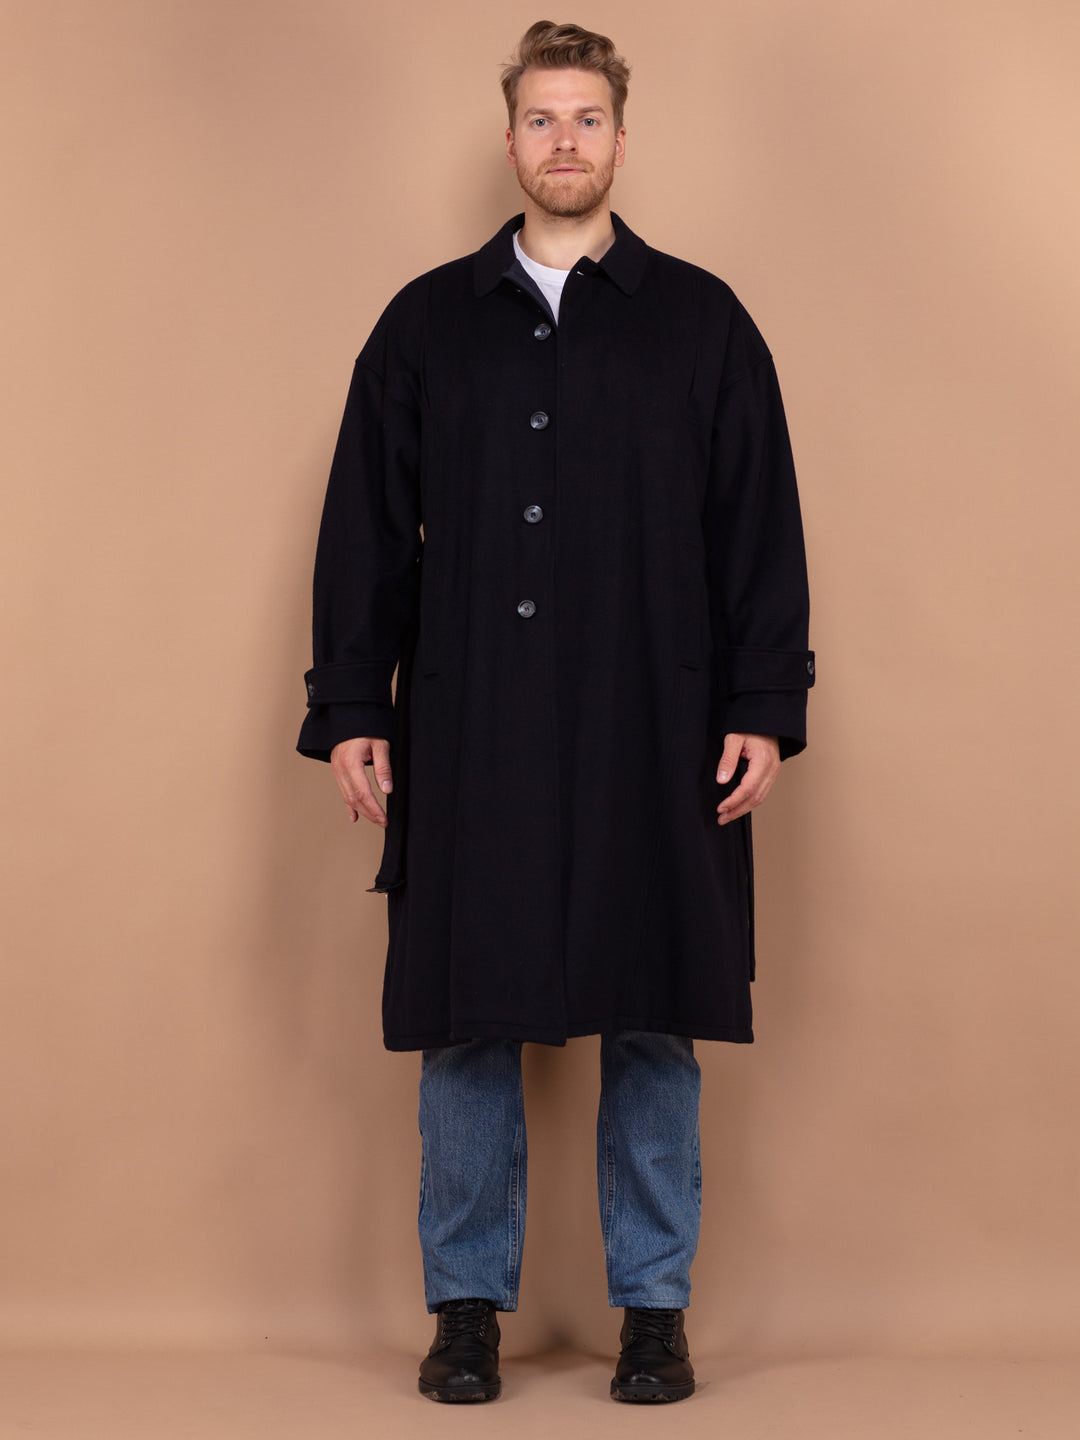 Men's Wool Coat, Classic Belted Coat Size XL, Long Wool Coat, Vintage Belted Coat For Men, Navy Blue Mens Coat, Vintage Outerwear, Timeless